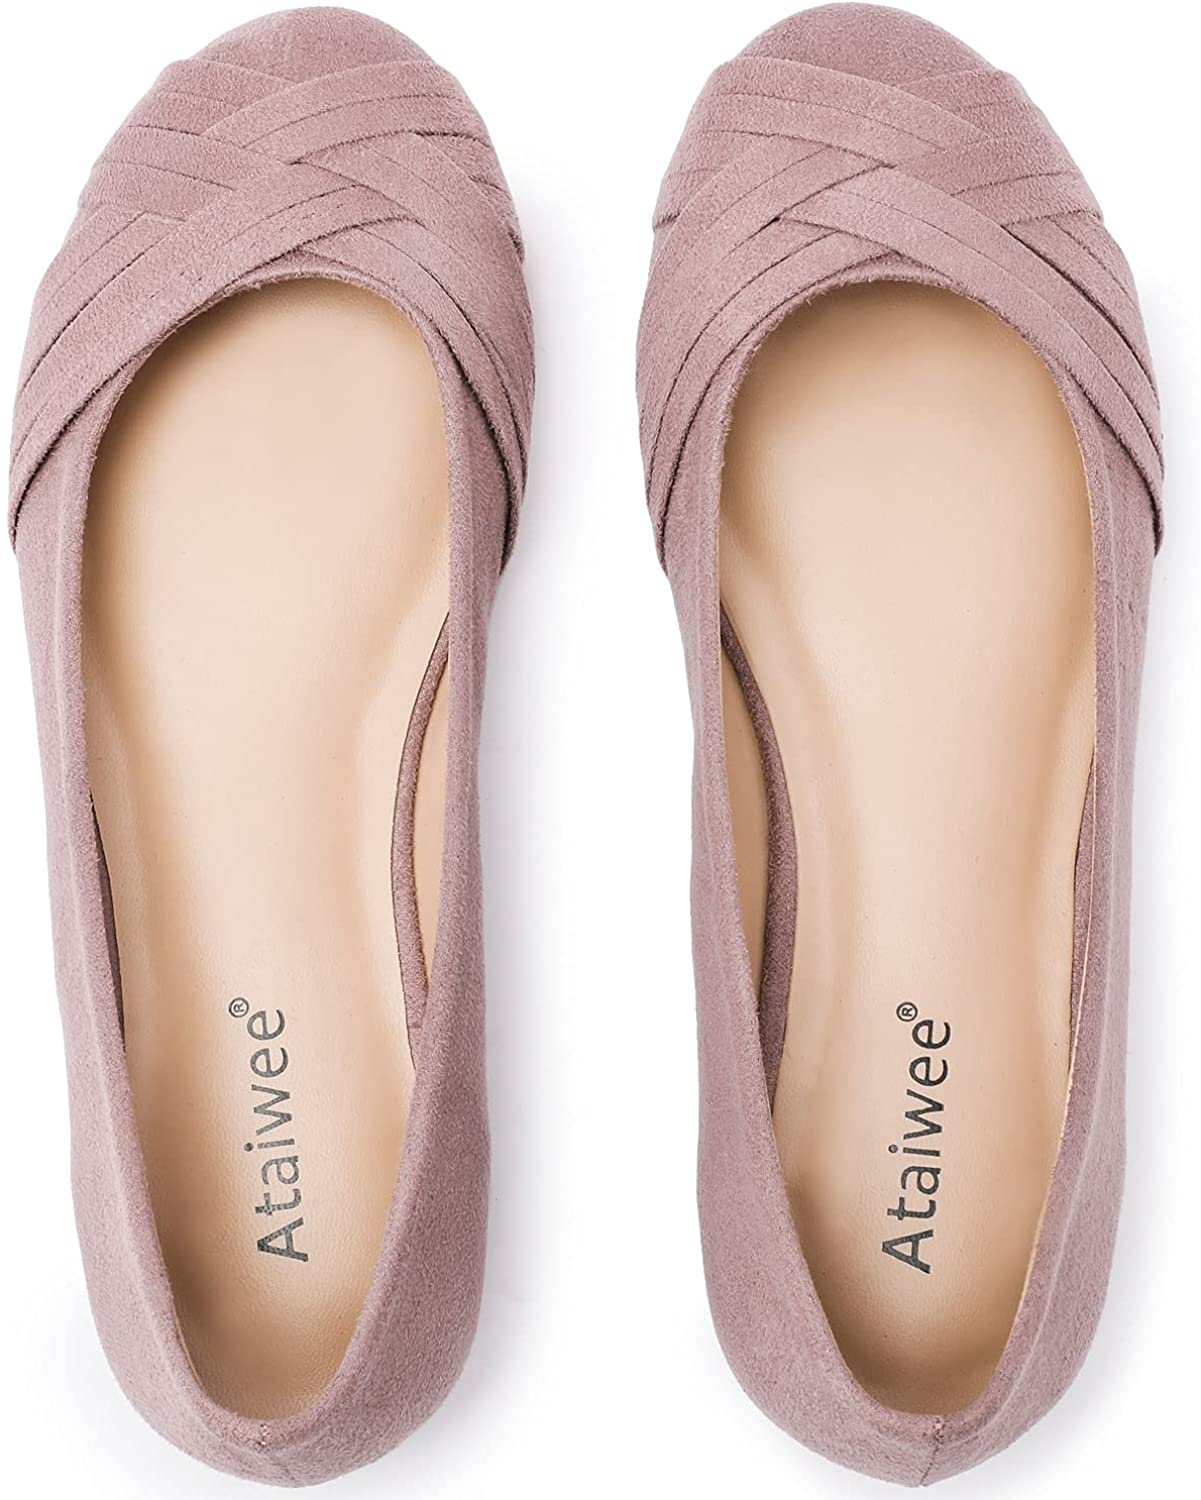 Ataiwee Women's Wide Flat Shoes，Classic Round Toe Slip on Wide Ballet Shoes. 